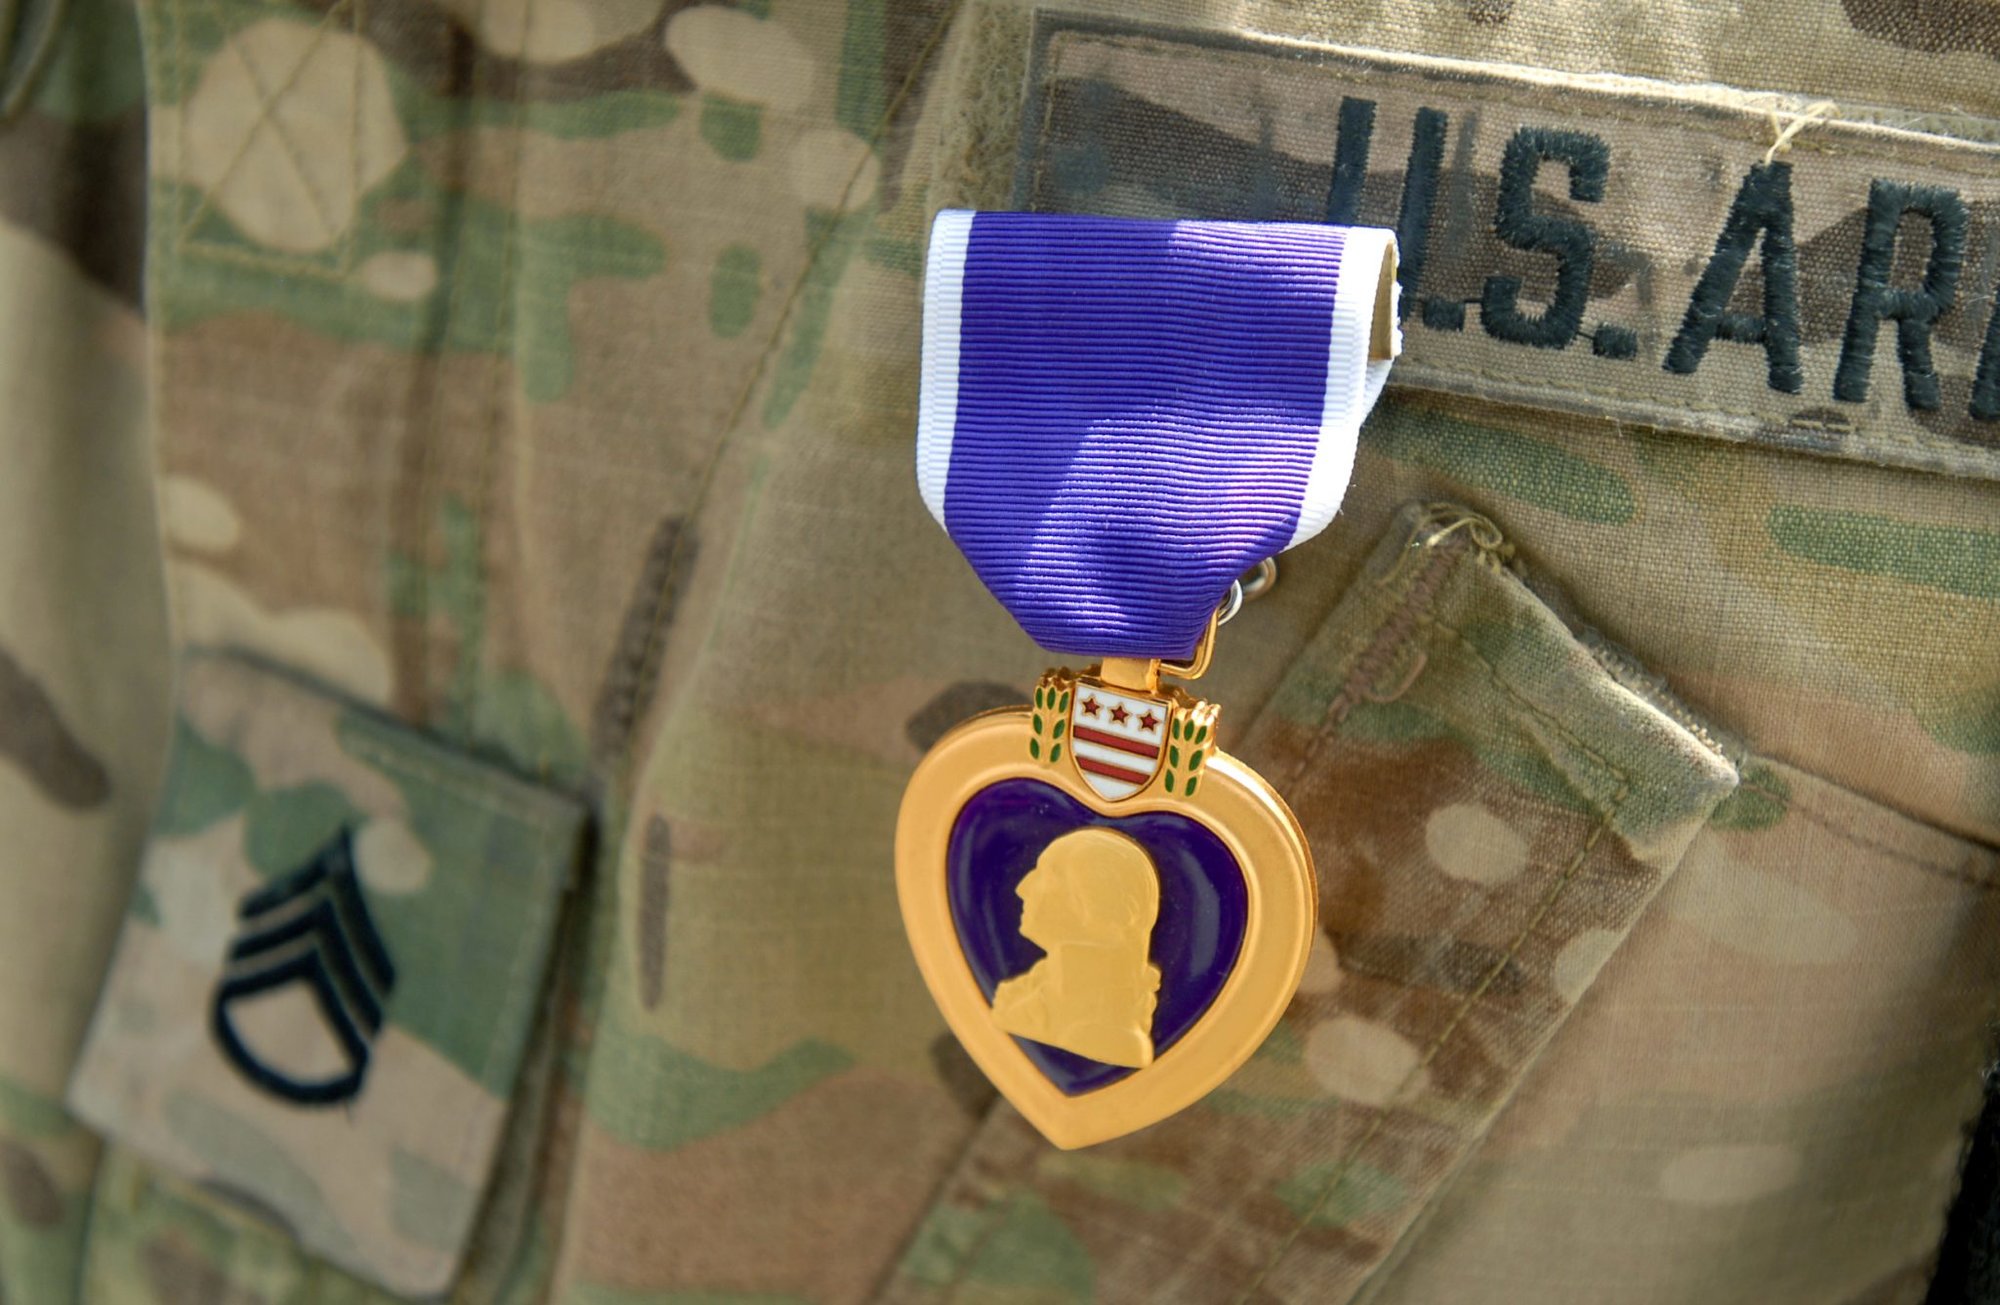 The Purple Heart medal stands out in contrast to the multicam uniform of Staff Sgt. Jason Ragucci, a public affairs broadcast specialist, assigned to the 1st Stryker Brigade Combat Team, 1st Armored Division during an award ceremony at Kandahar Airfield, Afghanistan, Aug. 6, 2013. Ragucci was awarded for wounds sustained during an improvised explosive device attack March 28, 2013, in the Maiwand district of Kandahar province. (U.S. Army National Guard photo by Staff Sgt. Scott Tynes/Released)